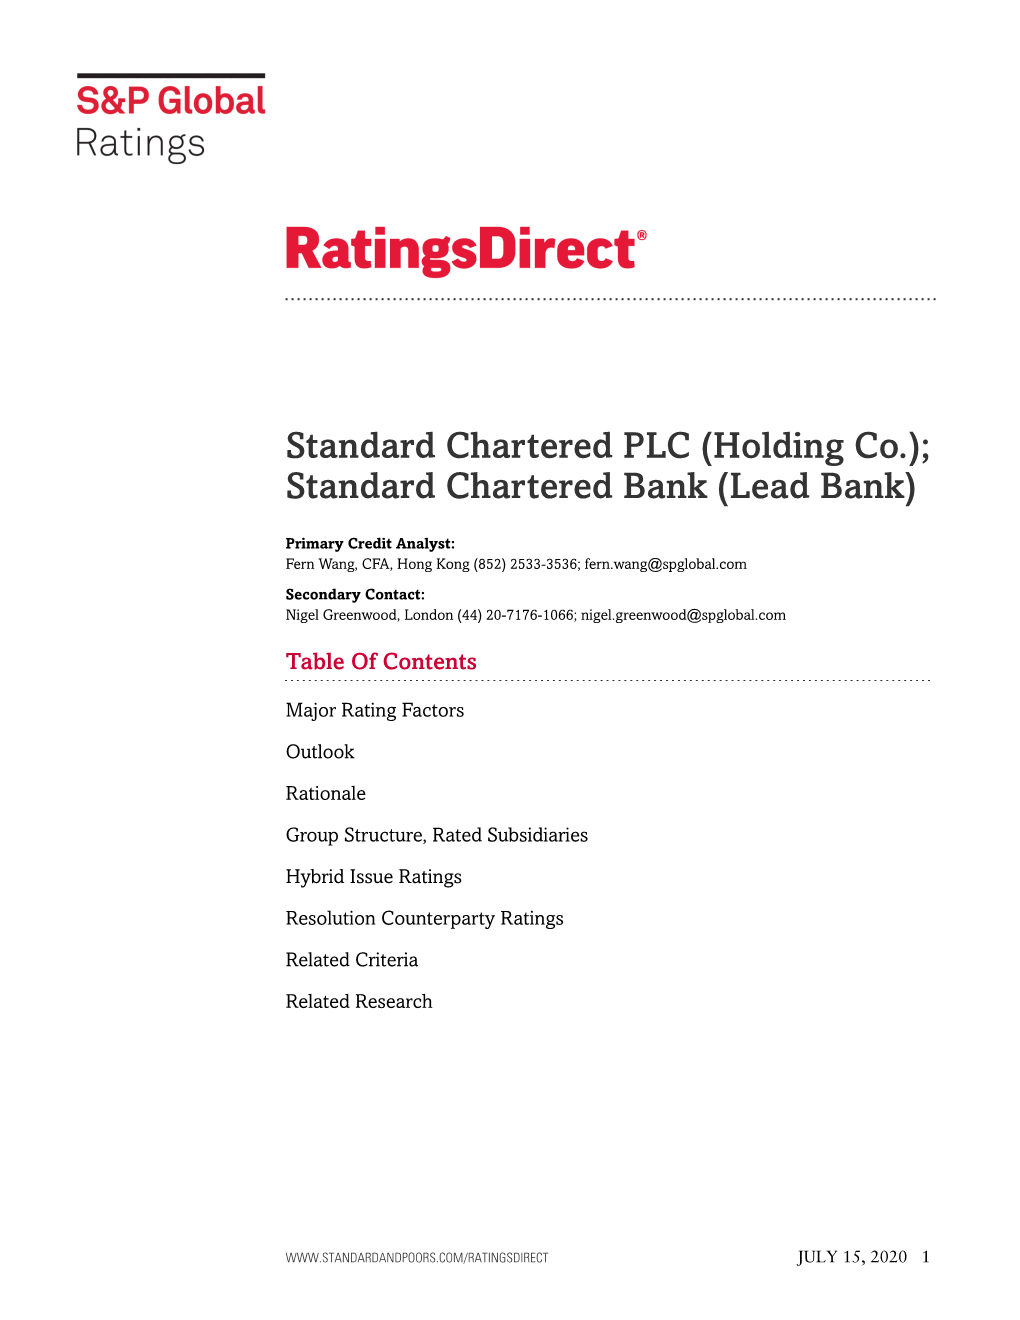 Holding Co.); Standard Chartered Bank (Lead Bank